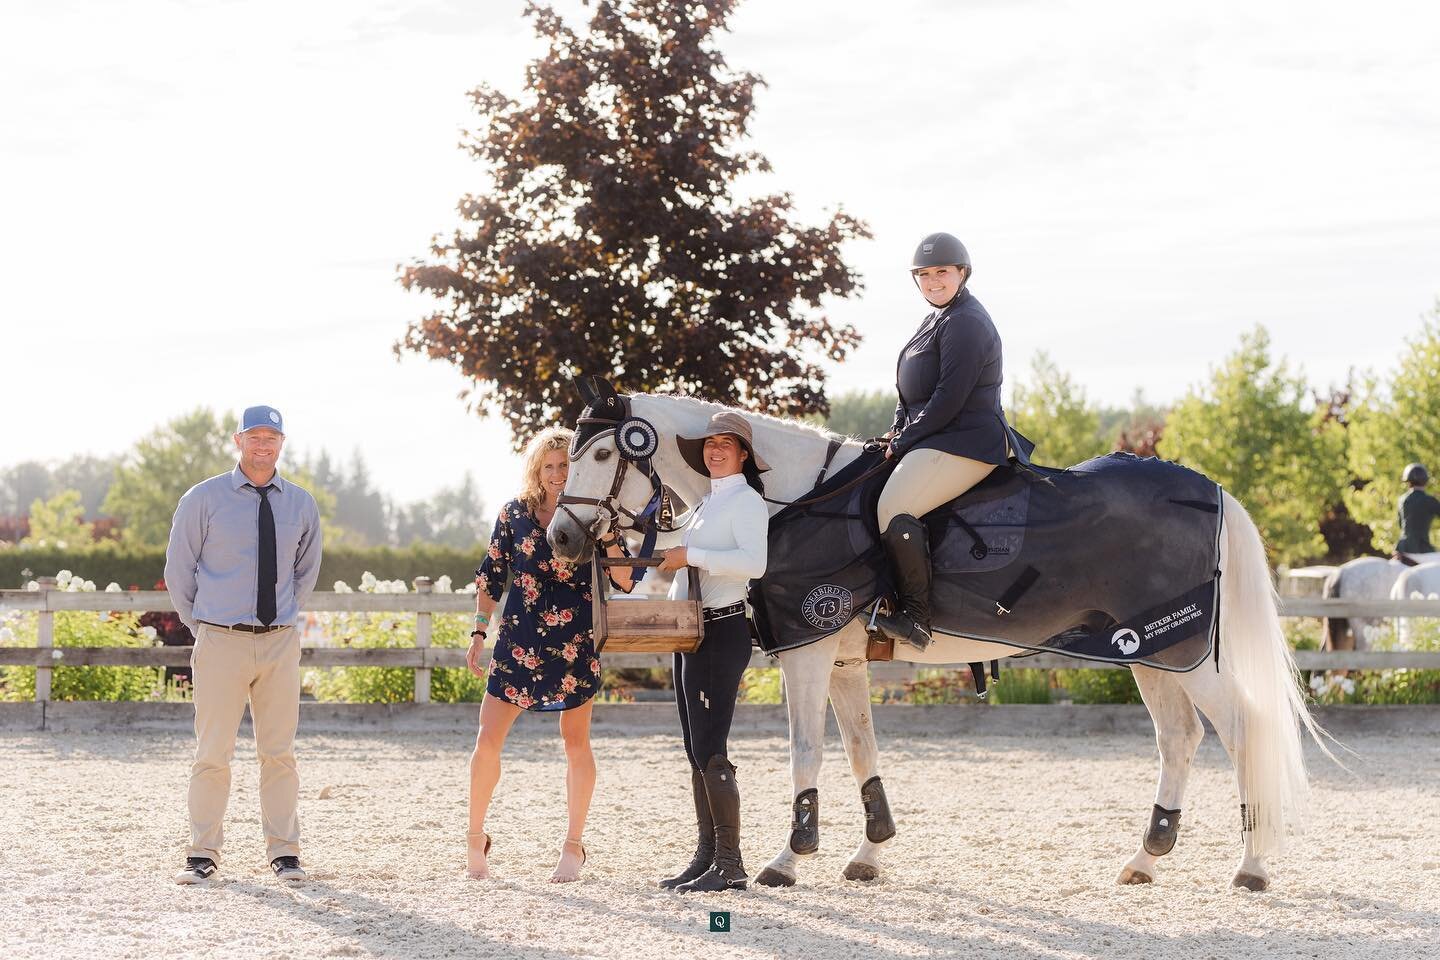 Congratulations @paige_eq and Vieba on their championship in the Betker Family &lsquo;My First Grand Prix&rsquo; series! 

Paige and Vieba raced to 1st, 2nd, and 7th over the span of the outdoor season, and picked up the overall win at the Harvest We